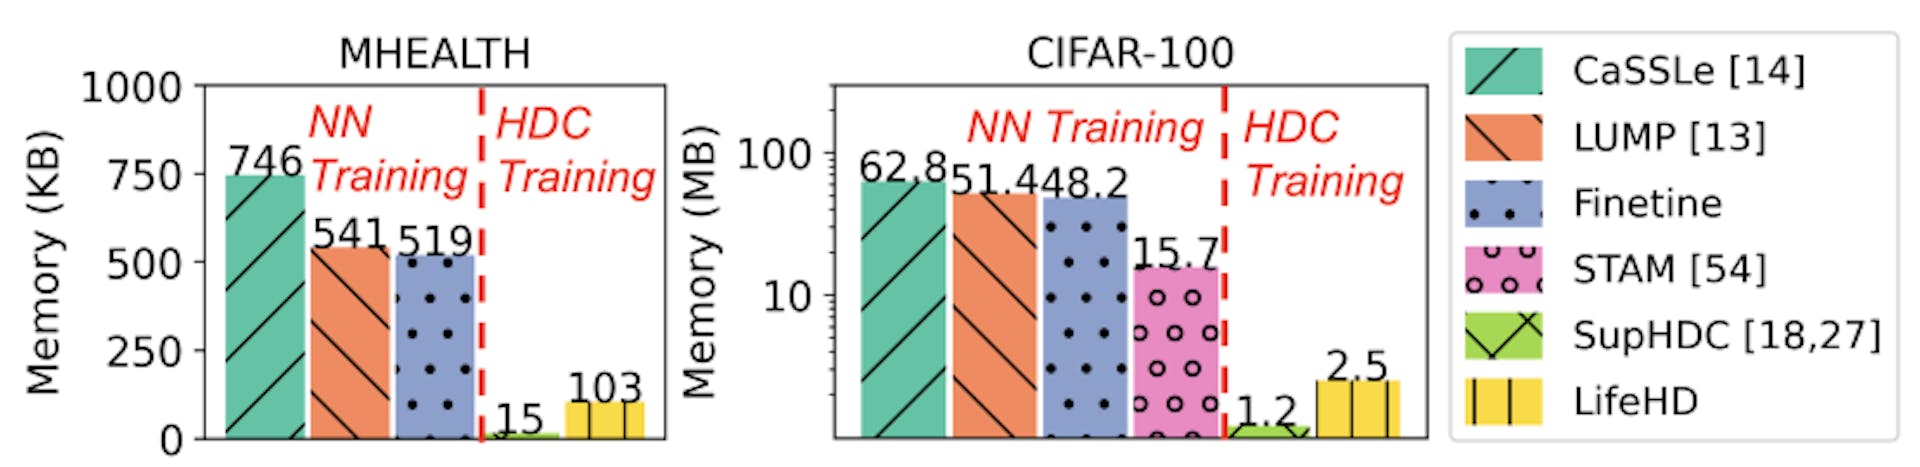 Figure 12: Peak memory footprint of all methods on MHEALTH (left) and CIFAR-100 (right) with batch size of 1. The results are representative for time series data and image data.